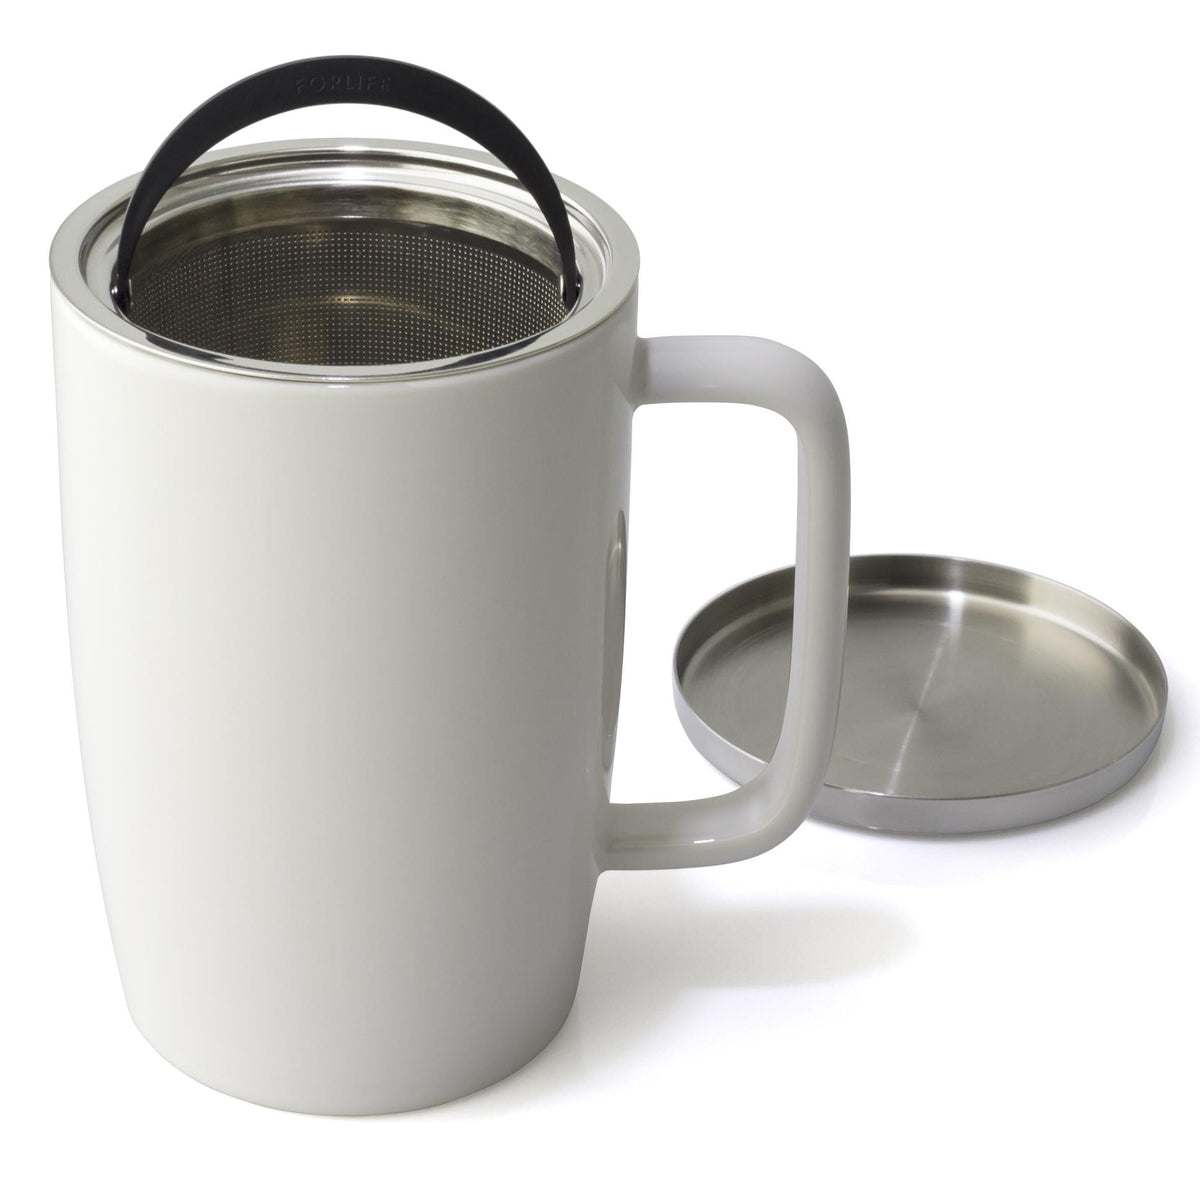 FORLIFE Mug With Basket Infuser and Stainless Steel Lid : Matte Minty Aqua